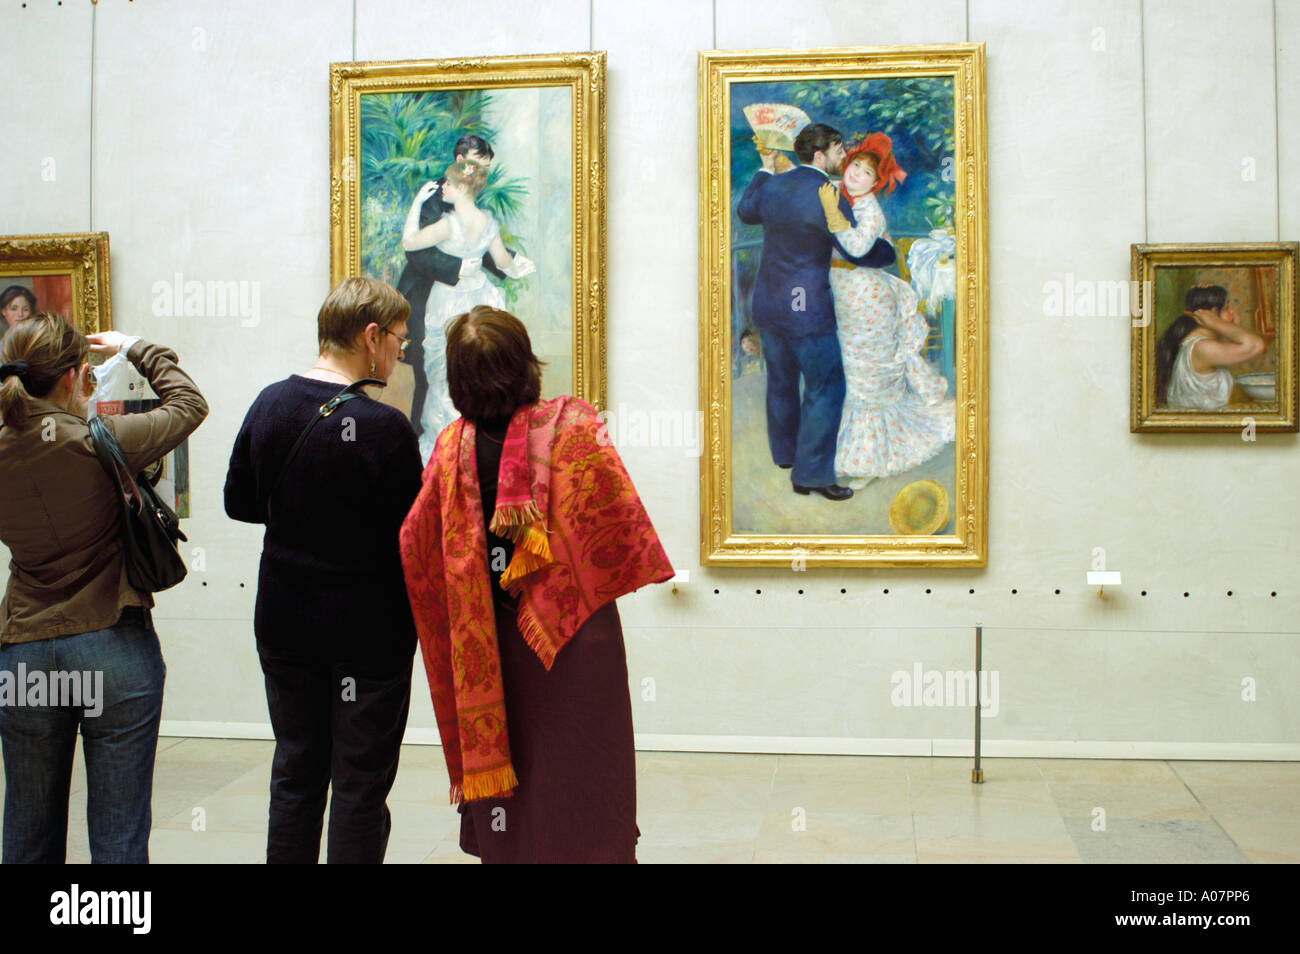 Women Looking at Paintings Paris France Interior 'French Impressionists Paintings' Gallery Orsay Museum, Musee d'Orsay, Renoir, Paris, fine art Stock Photo